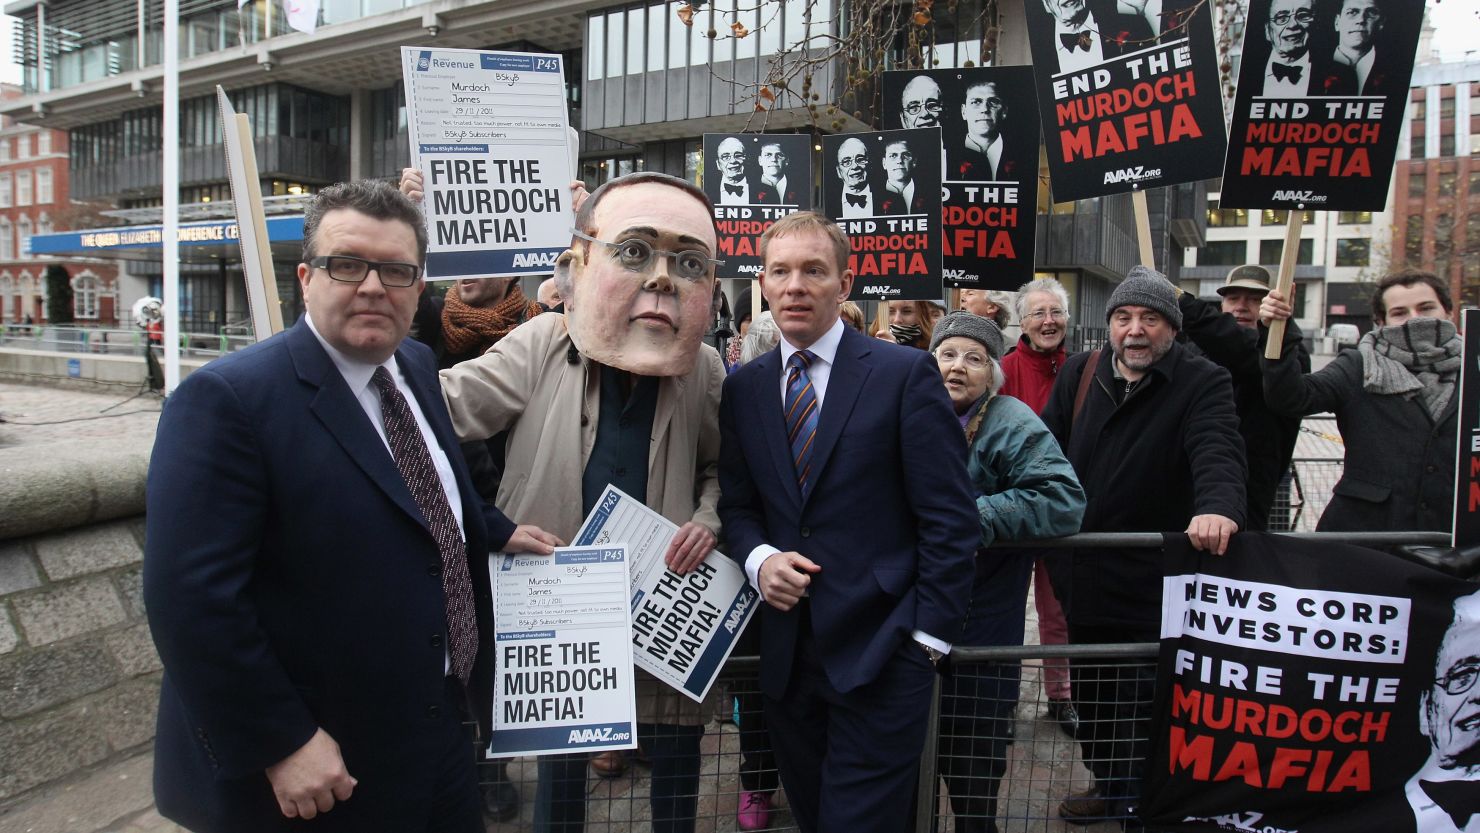 MP Chris Bryant (right) joins protesters calling for James Murdoch to stand down as chairman on November 29, 2011.